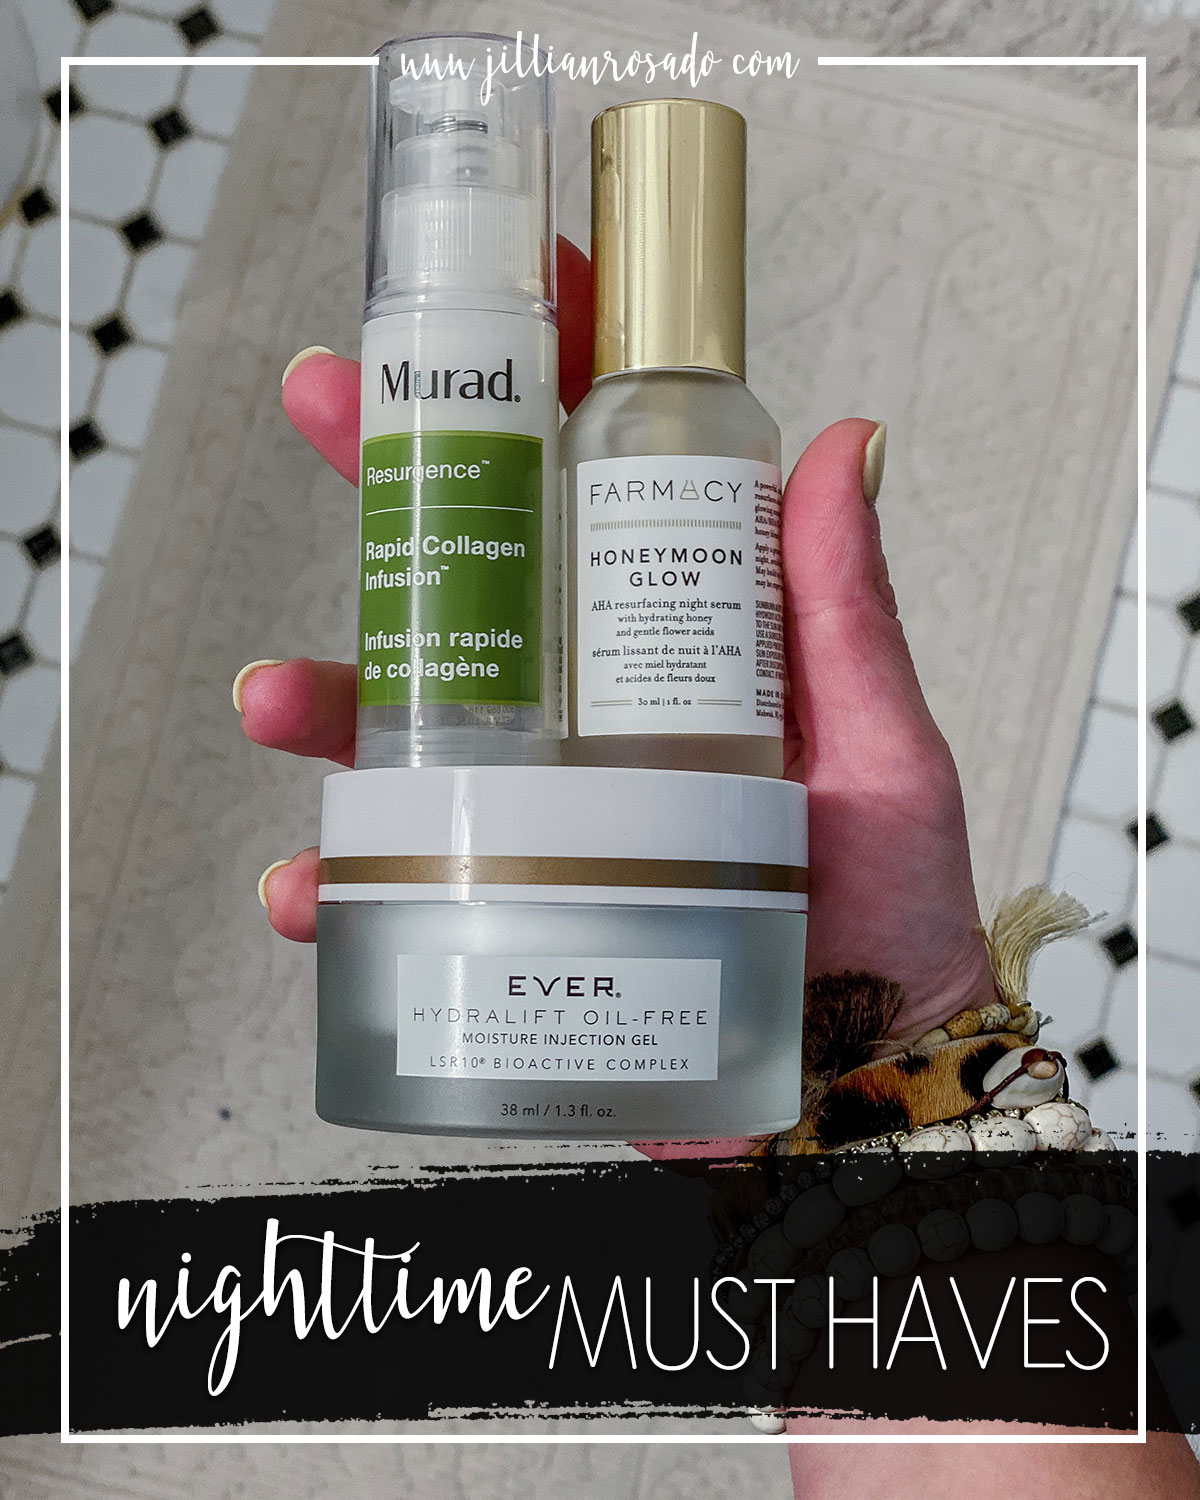 Nighttime Skincare Routine Must Haves